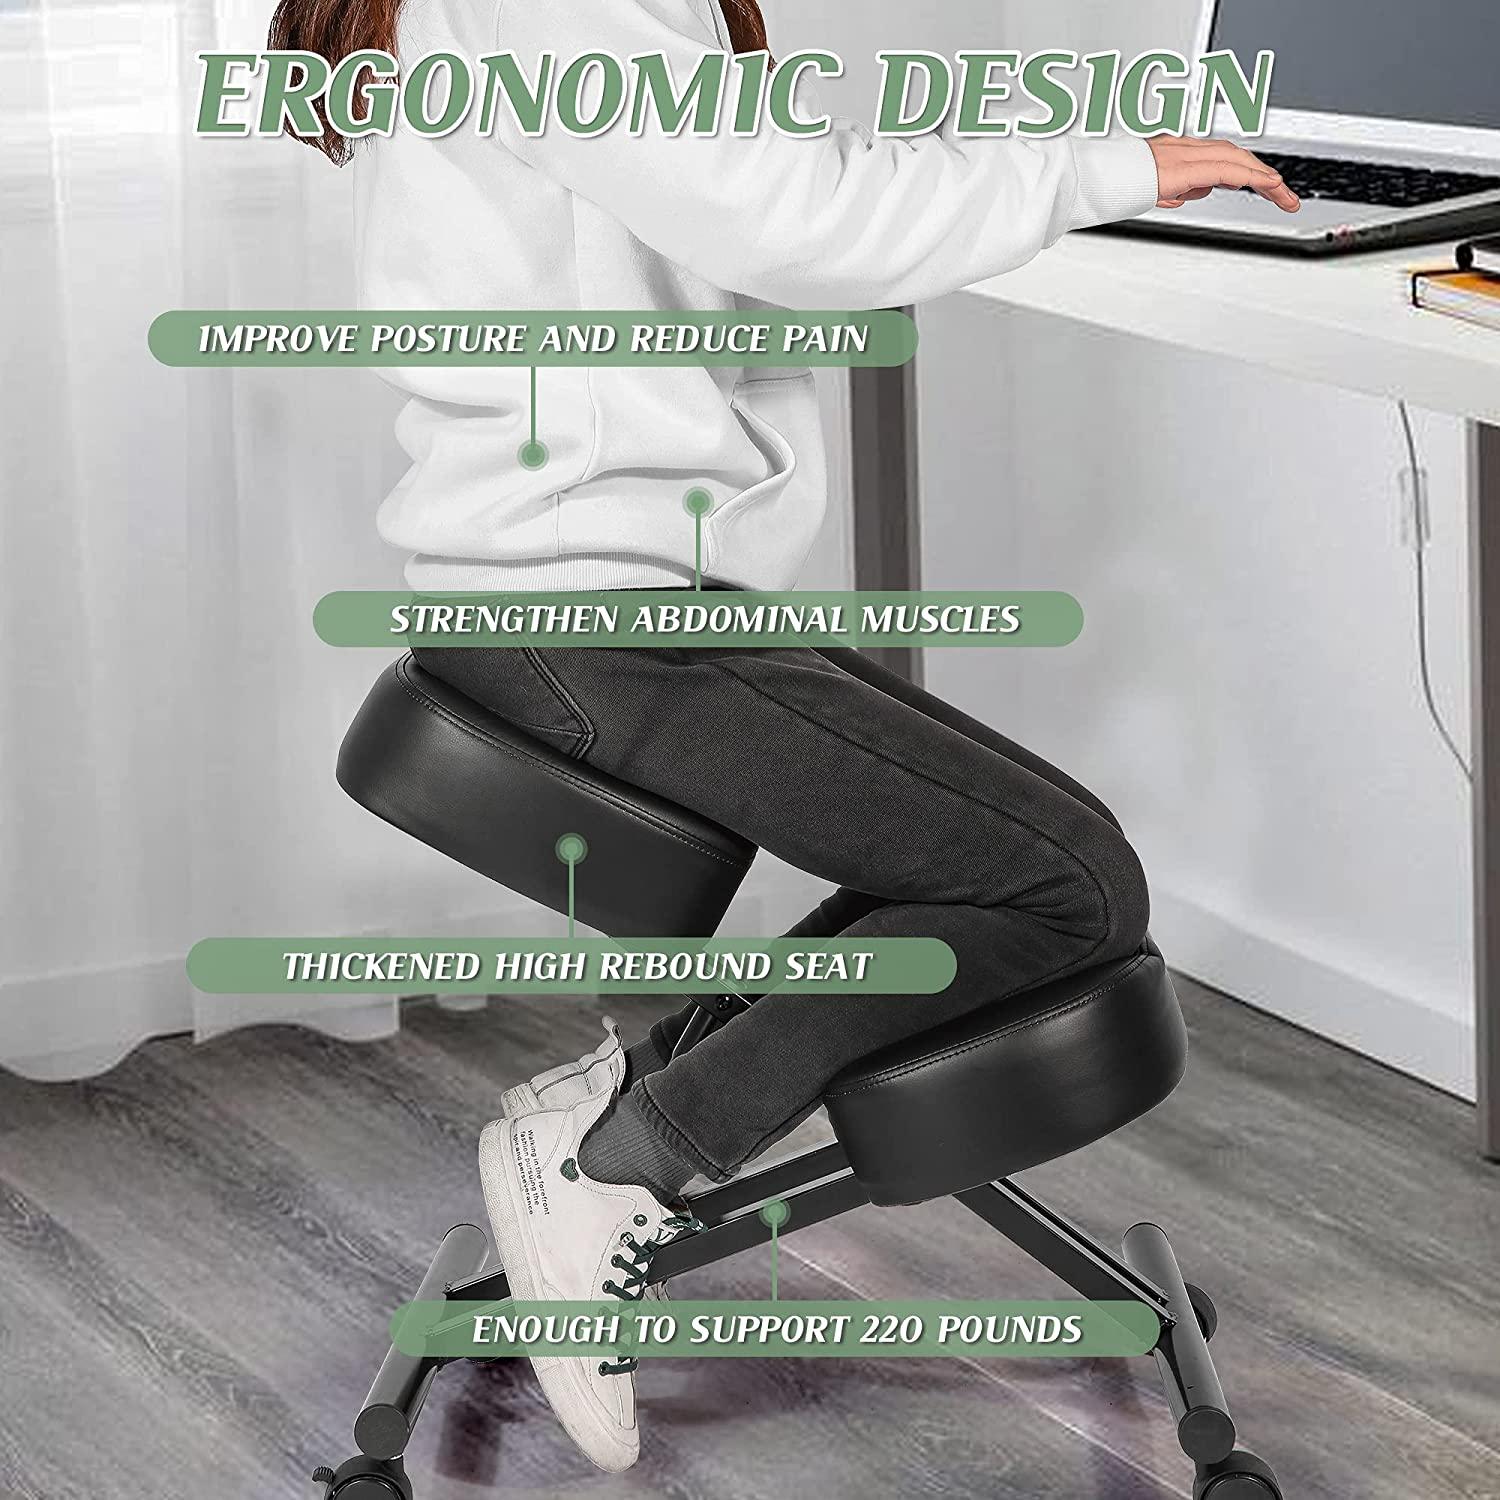 Adjustable Ergonomic Kneeling Chair Stool for Office and Home Angled seat with Lockable Wheel Support, 220LBS - Bosonshop